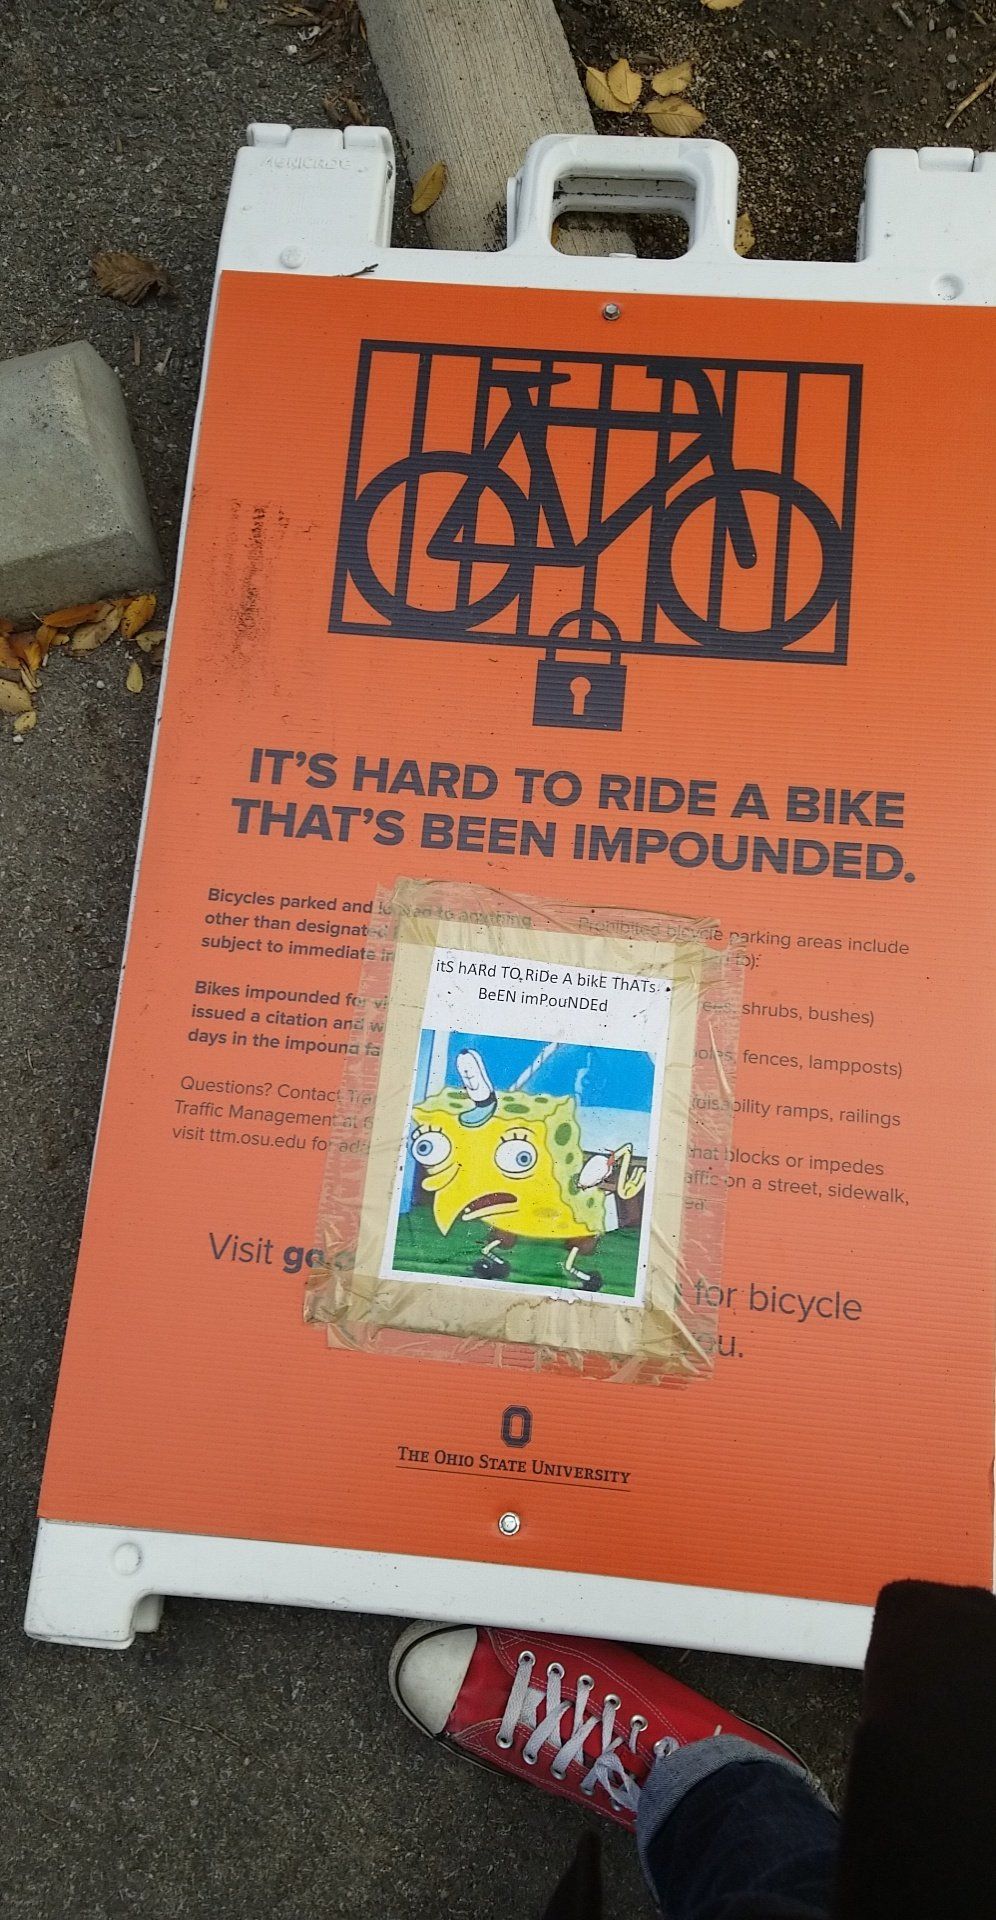 My university has been yelling at students for not locking their bikes on appropriate bike racks, here is the student retaliation.